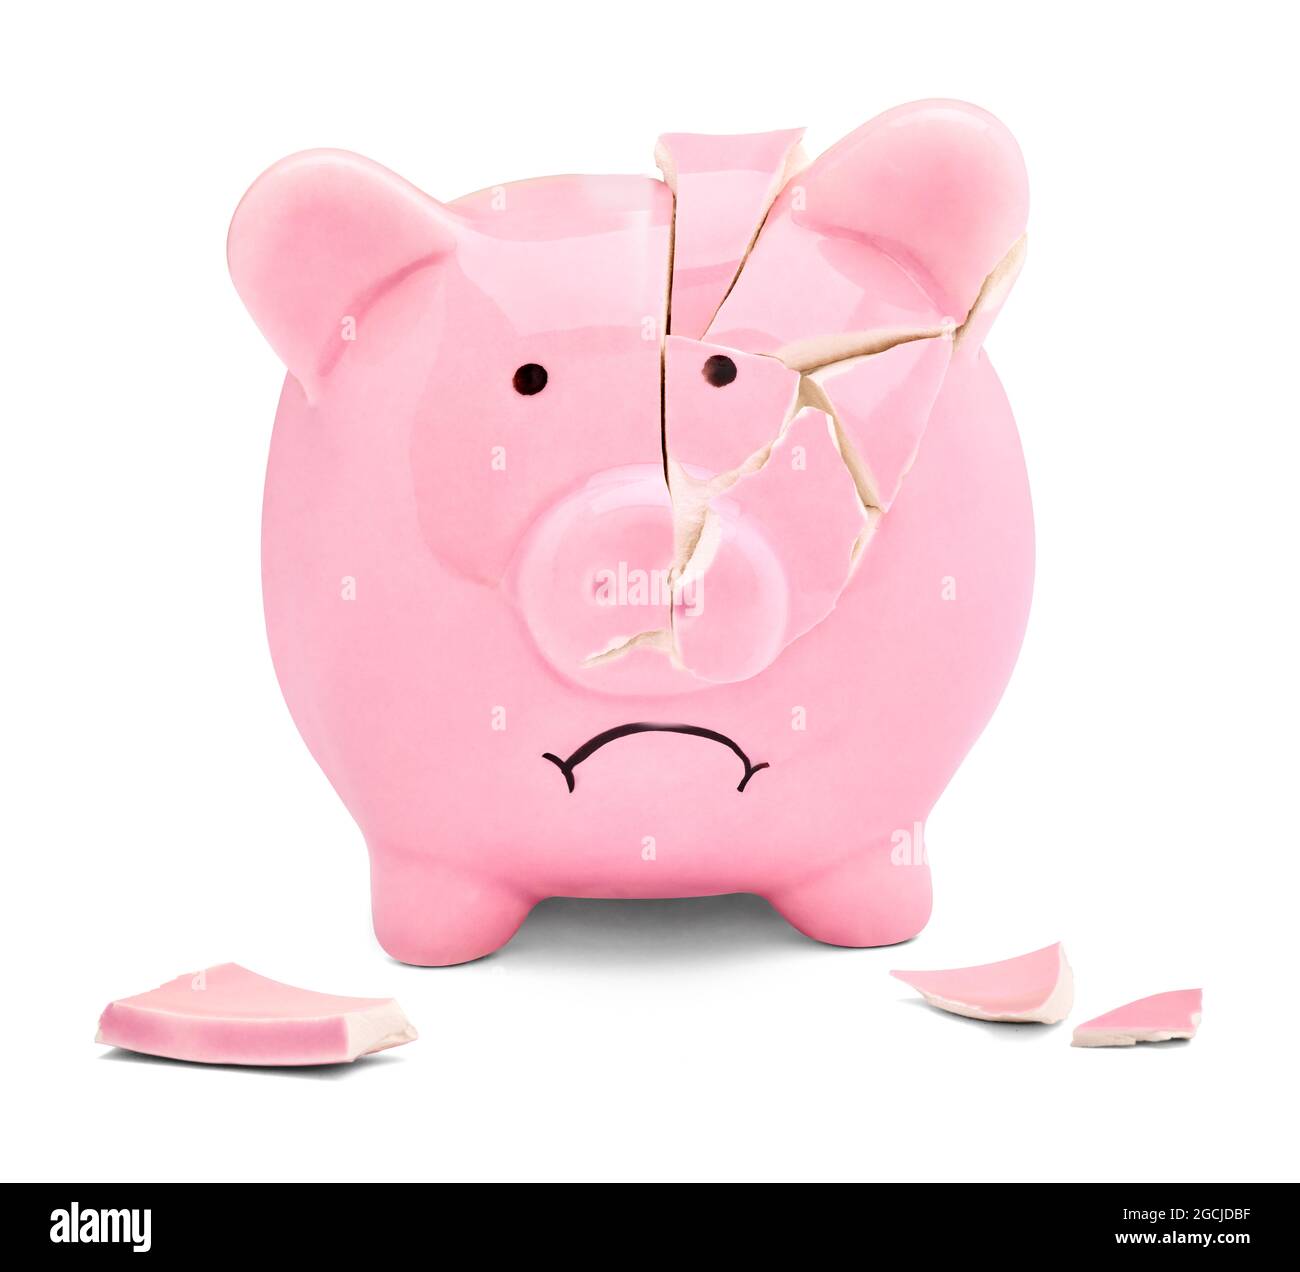 Close up of a broken pink piggy bank on white background Stock Photo